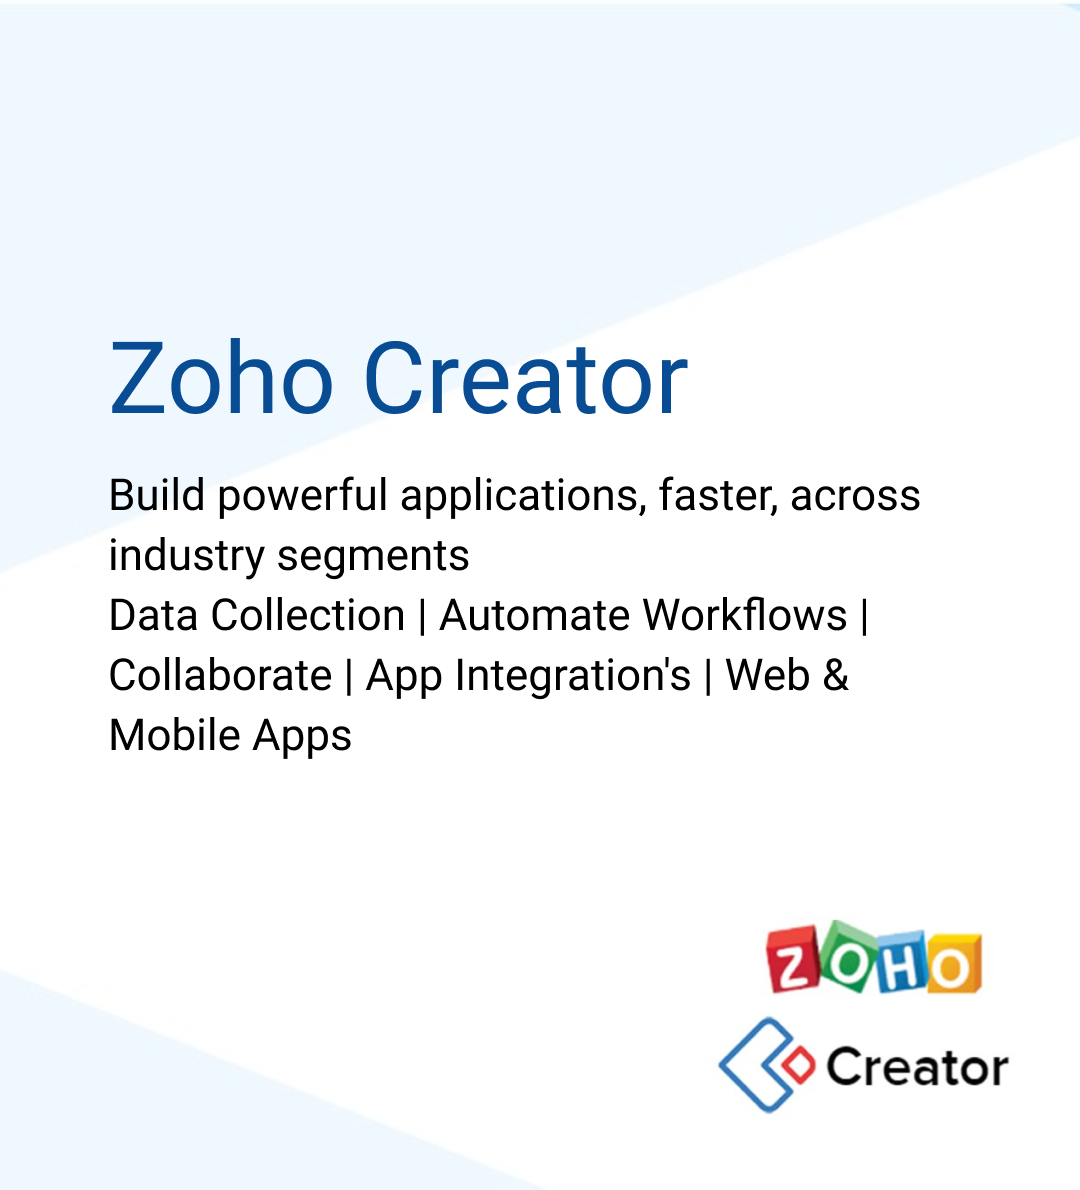 Zoho Creator build powerful applications, faster, across industry segments used for Data Collection, Automate Workflows, Collaborate, App Integrations, Web and Mobile Apps